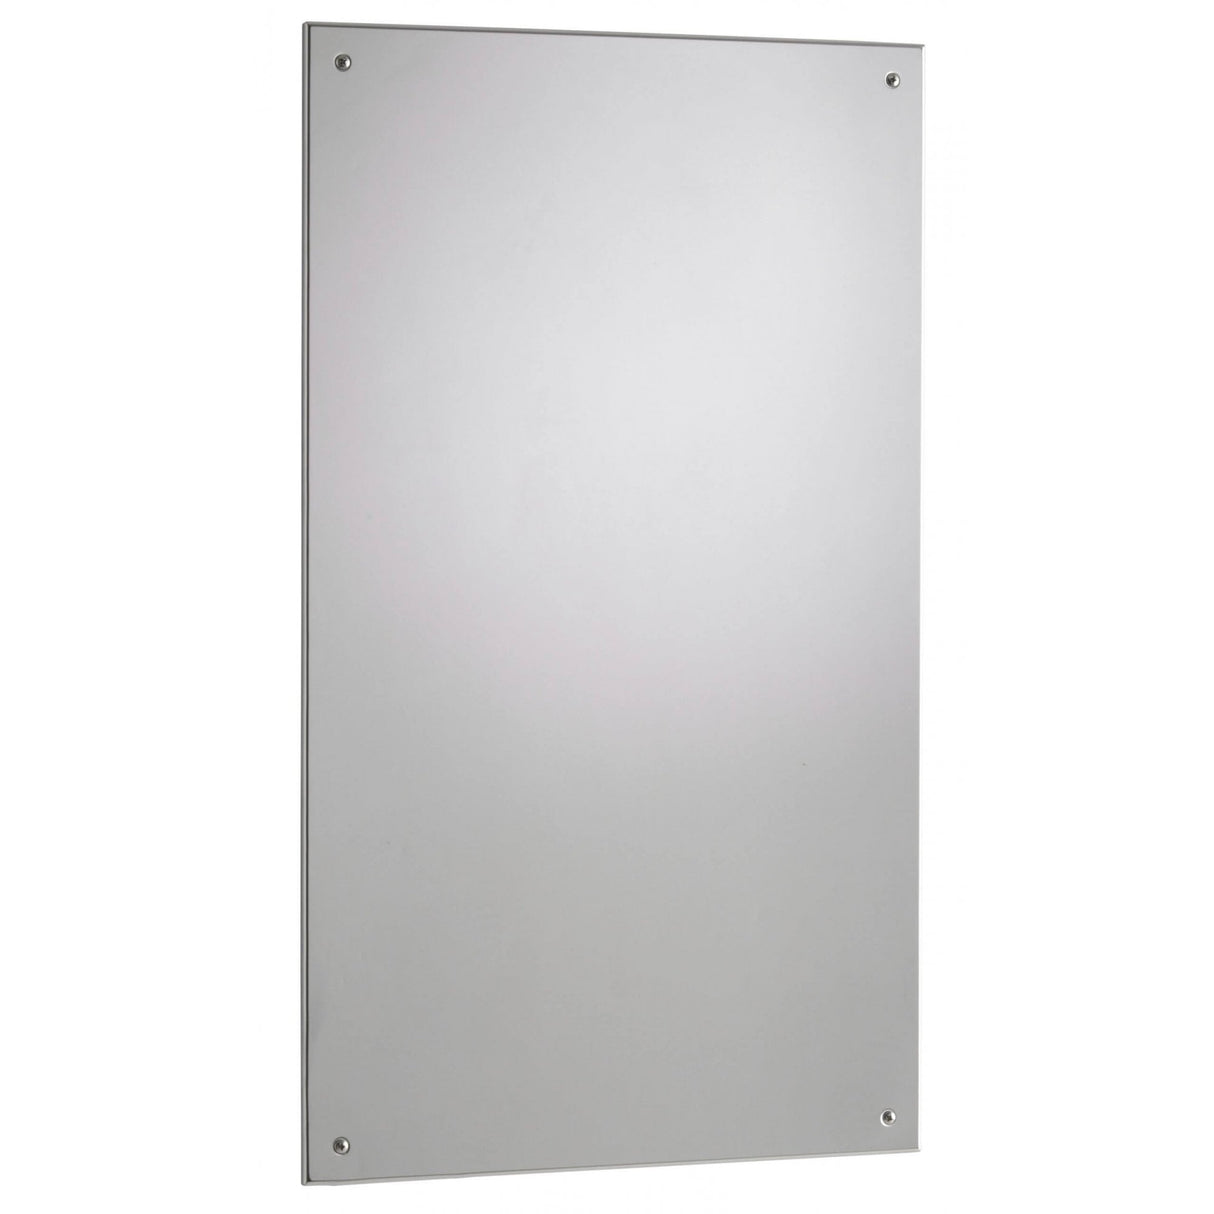 Unbreakable Frameless High Polished Stainless Steel Mirror B-1556_1830 (445x749x6)